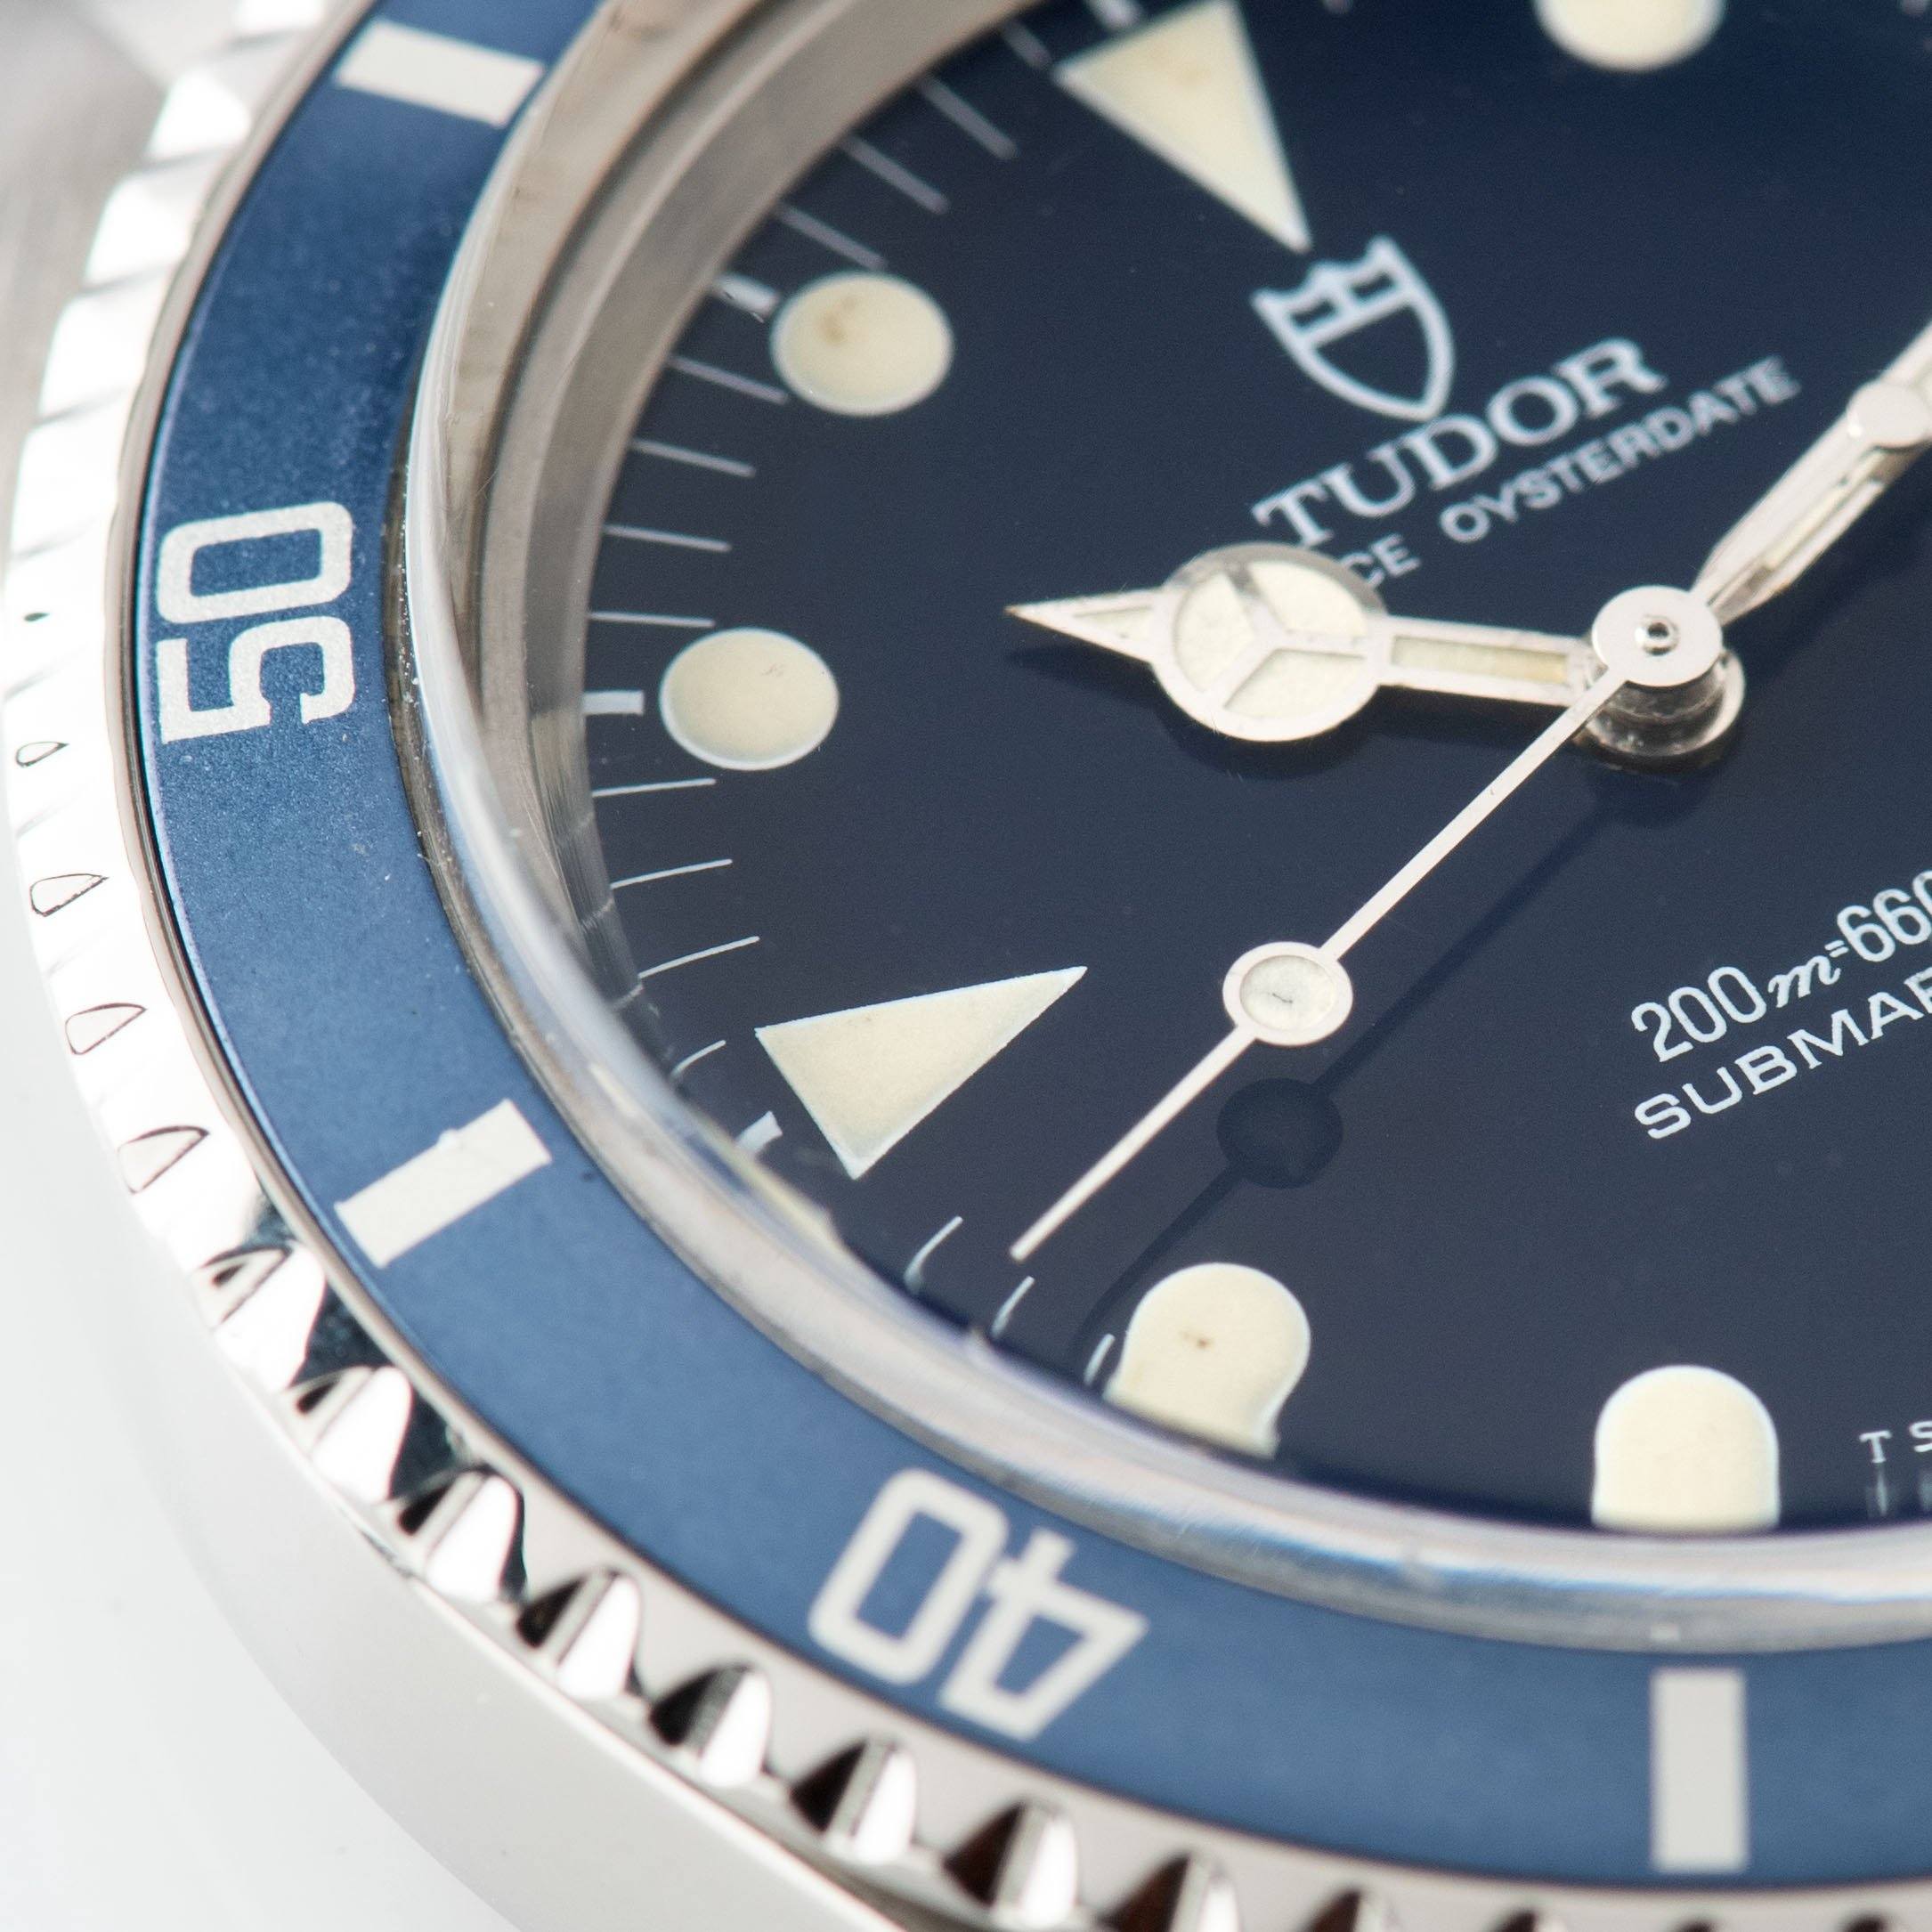 Tudor Submariner Date Blue Dial Reference 79090